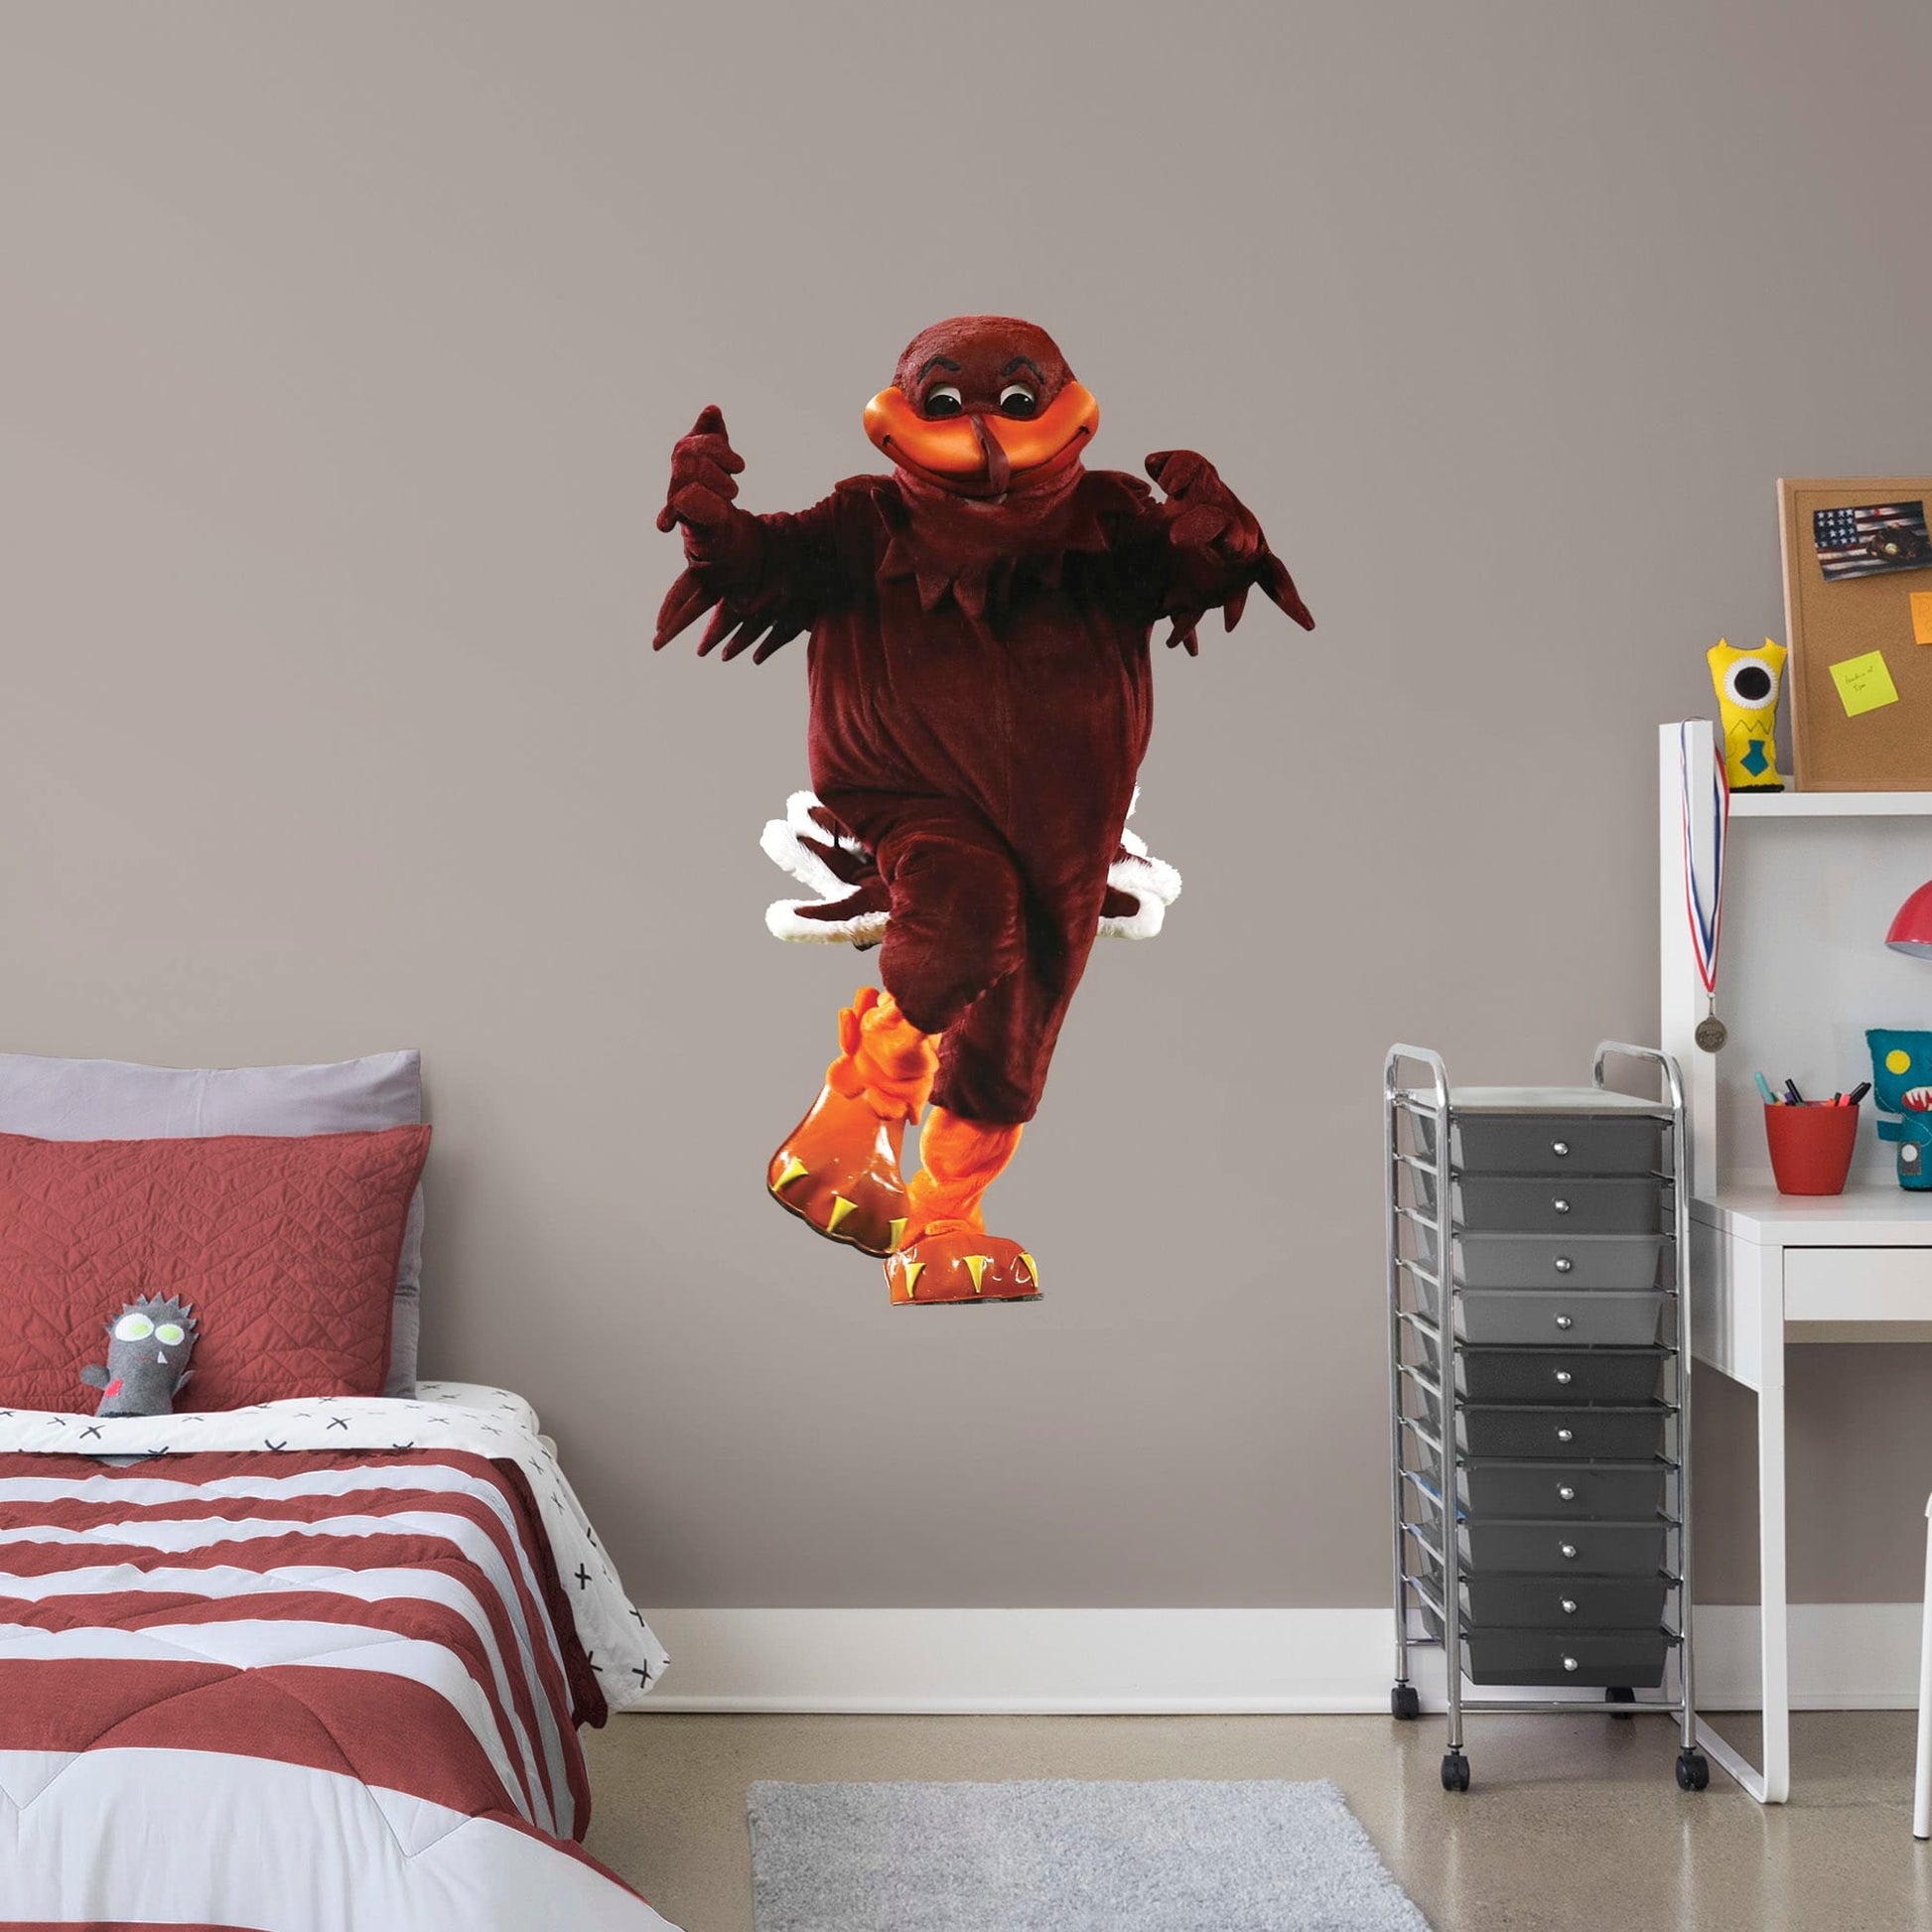 Large Mascot + 2 Decals (11"W x 17"H)